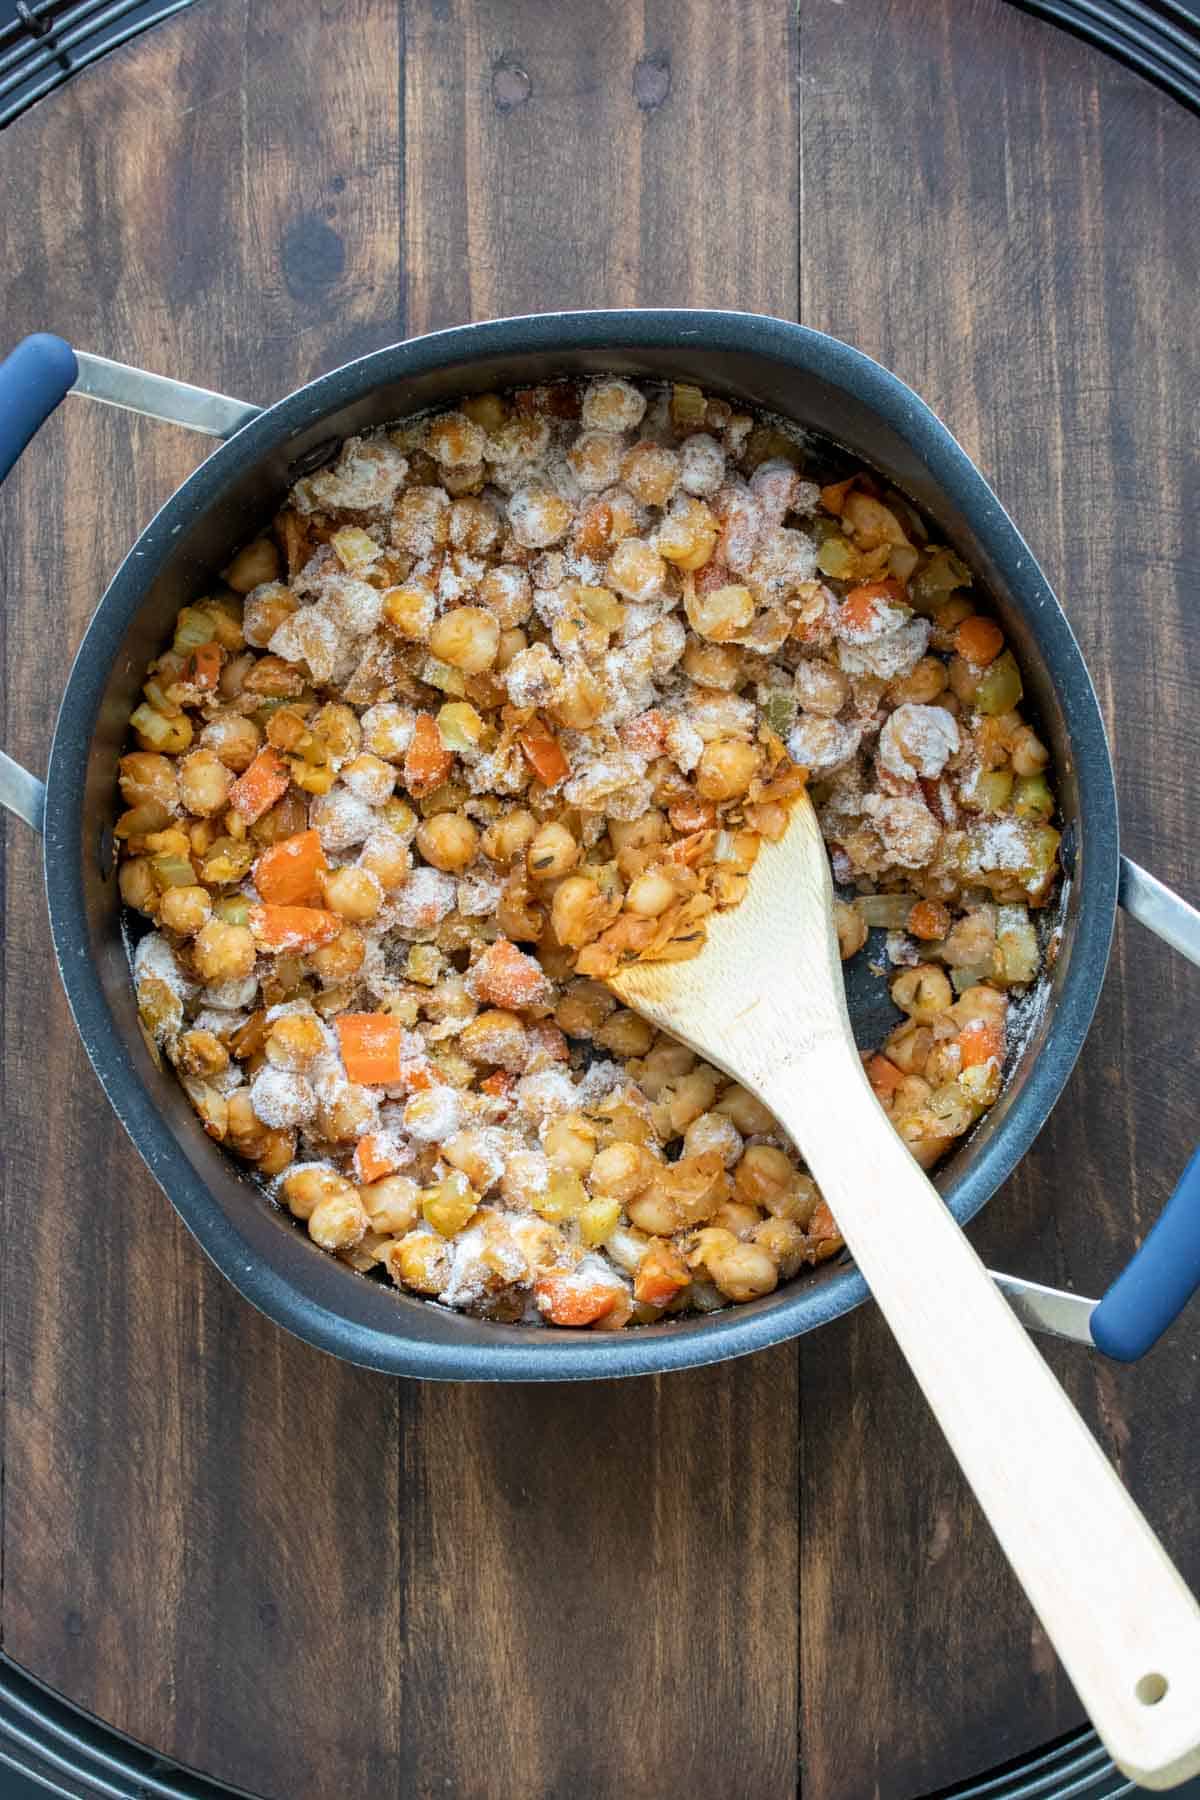 Wooden spoon mixing veggies and chickpeas topped with flour in a pot